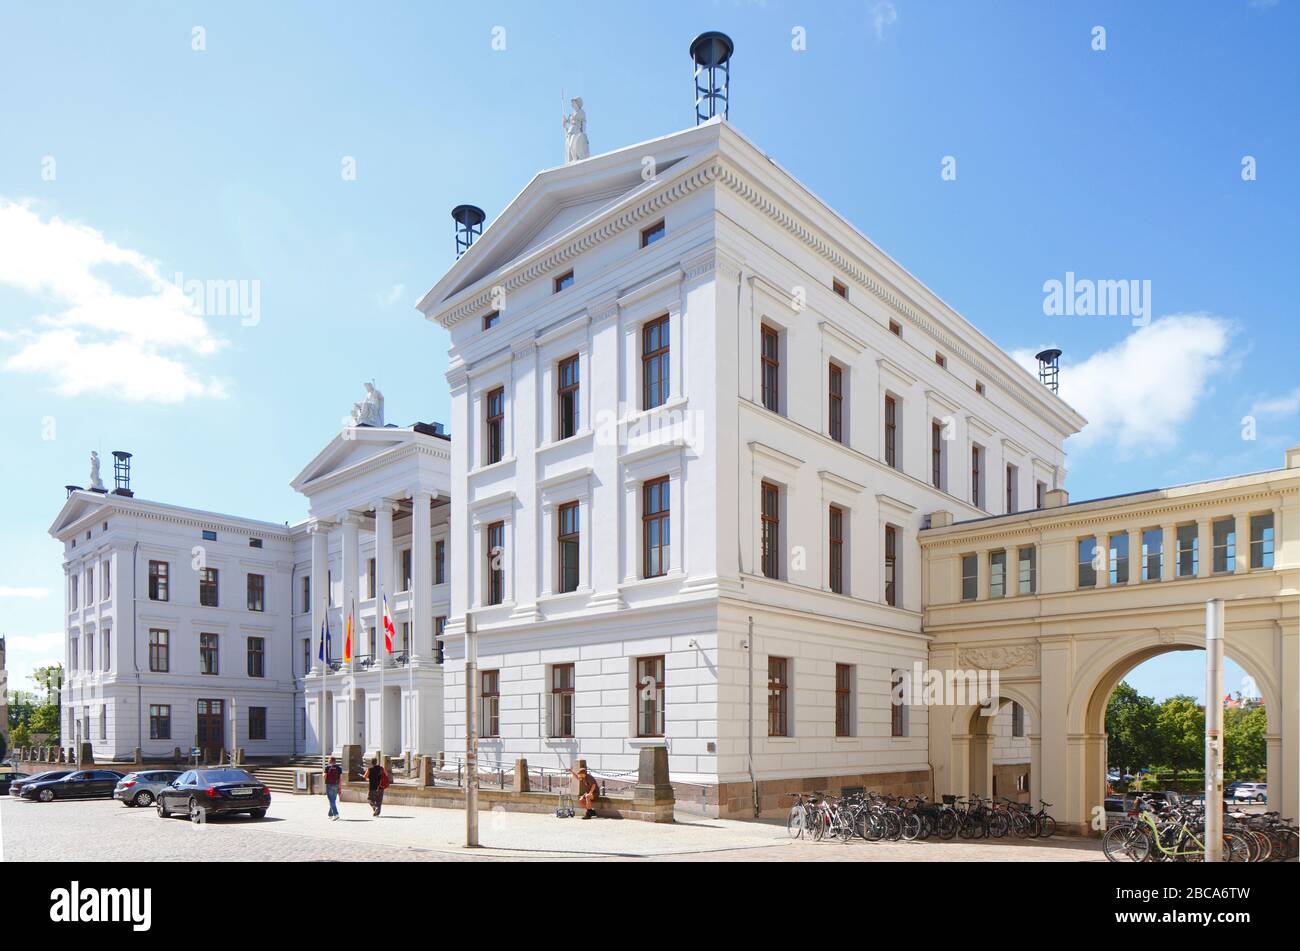 College building, State Chancellery and Ministry of Transport, Building and Regional Development, Schwerin, Mecklenburg-Western Pomerania, Germany, Eu Stock Photo